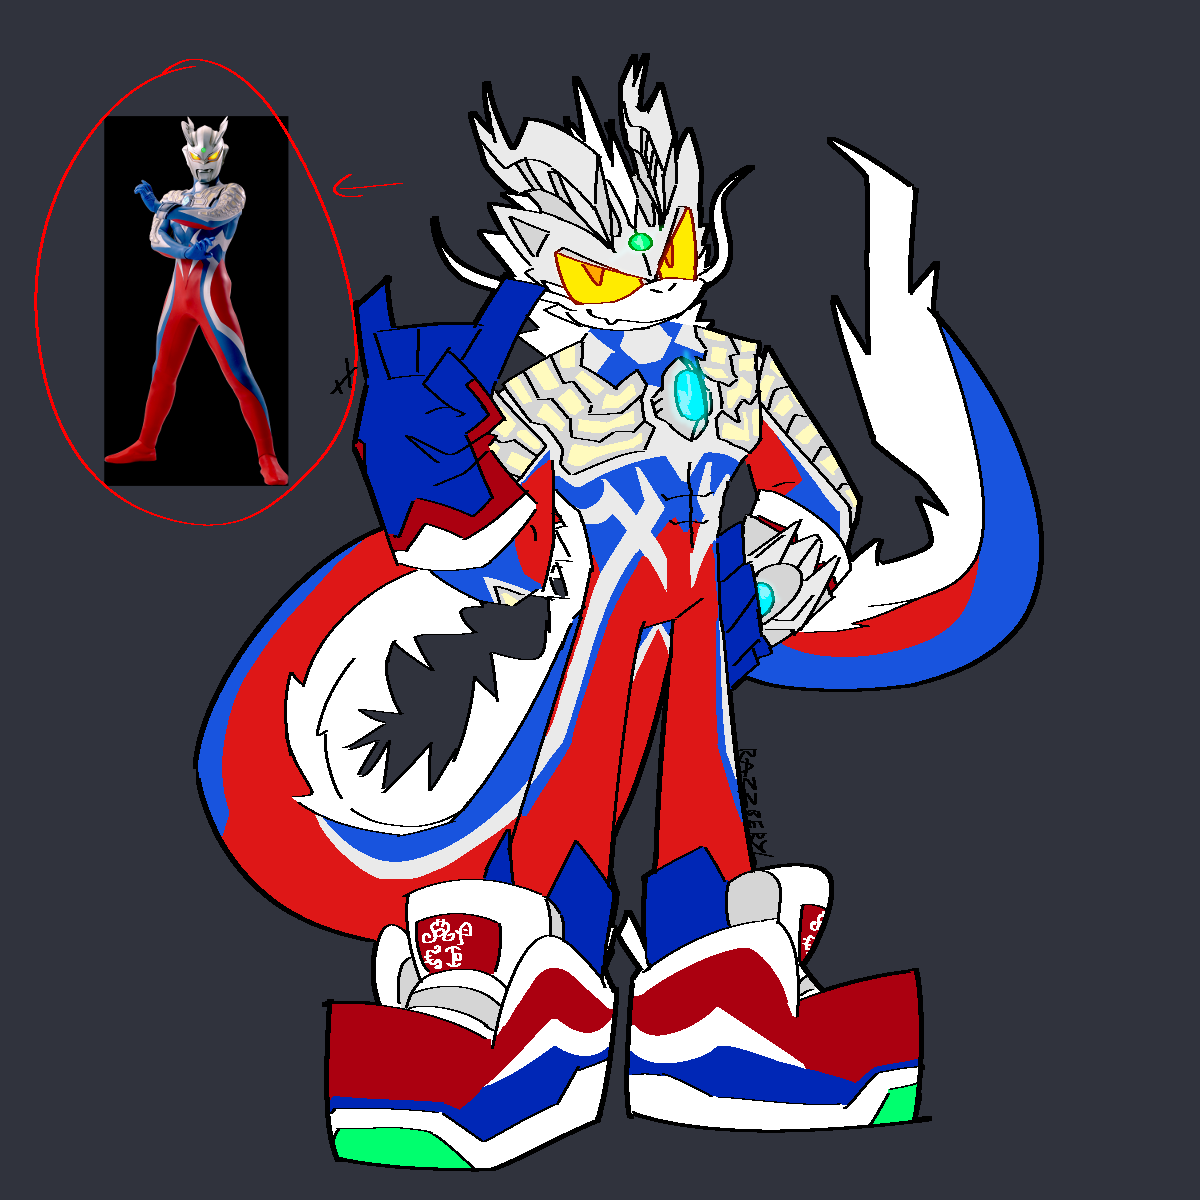 god forgive me i turned another ultraman into a sonic character. zero but he. dragon!!!!!!